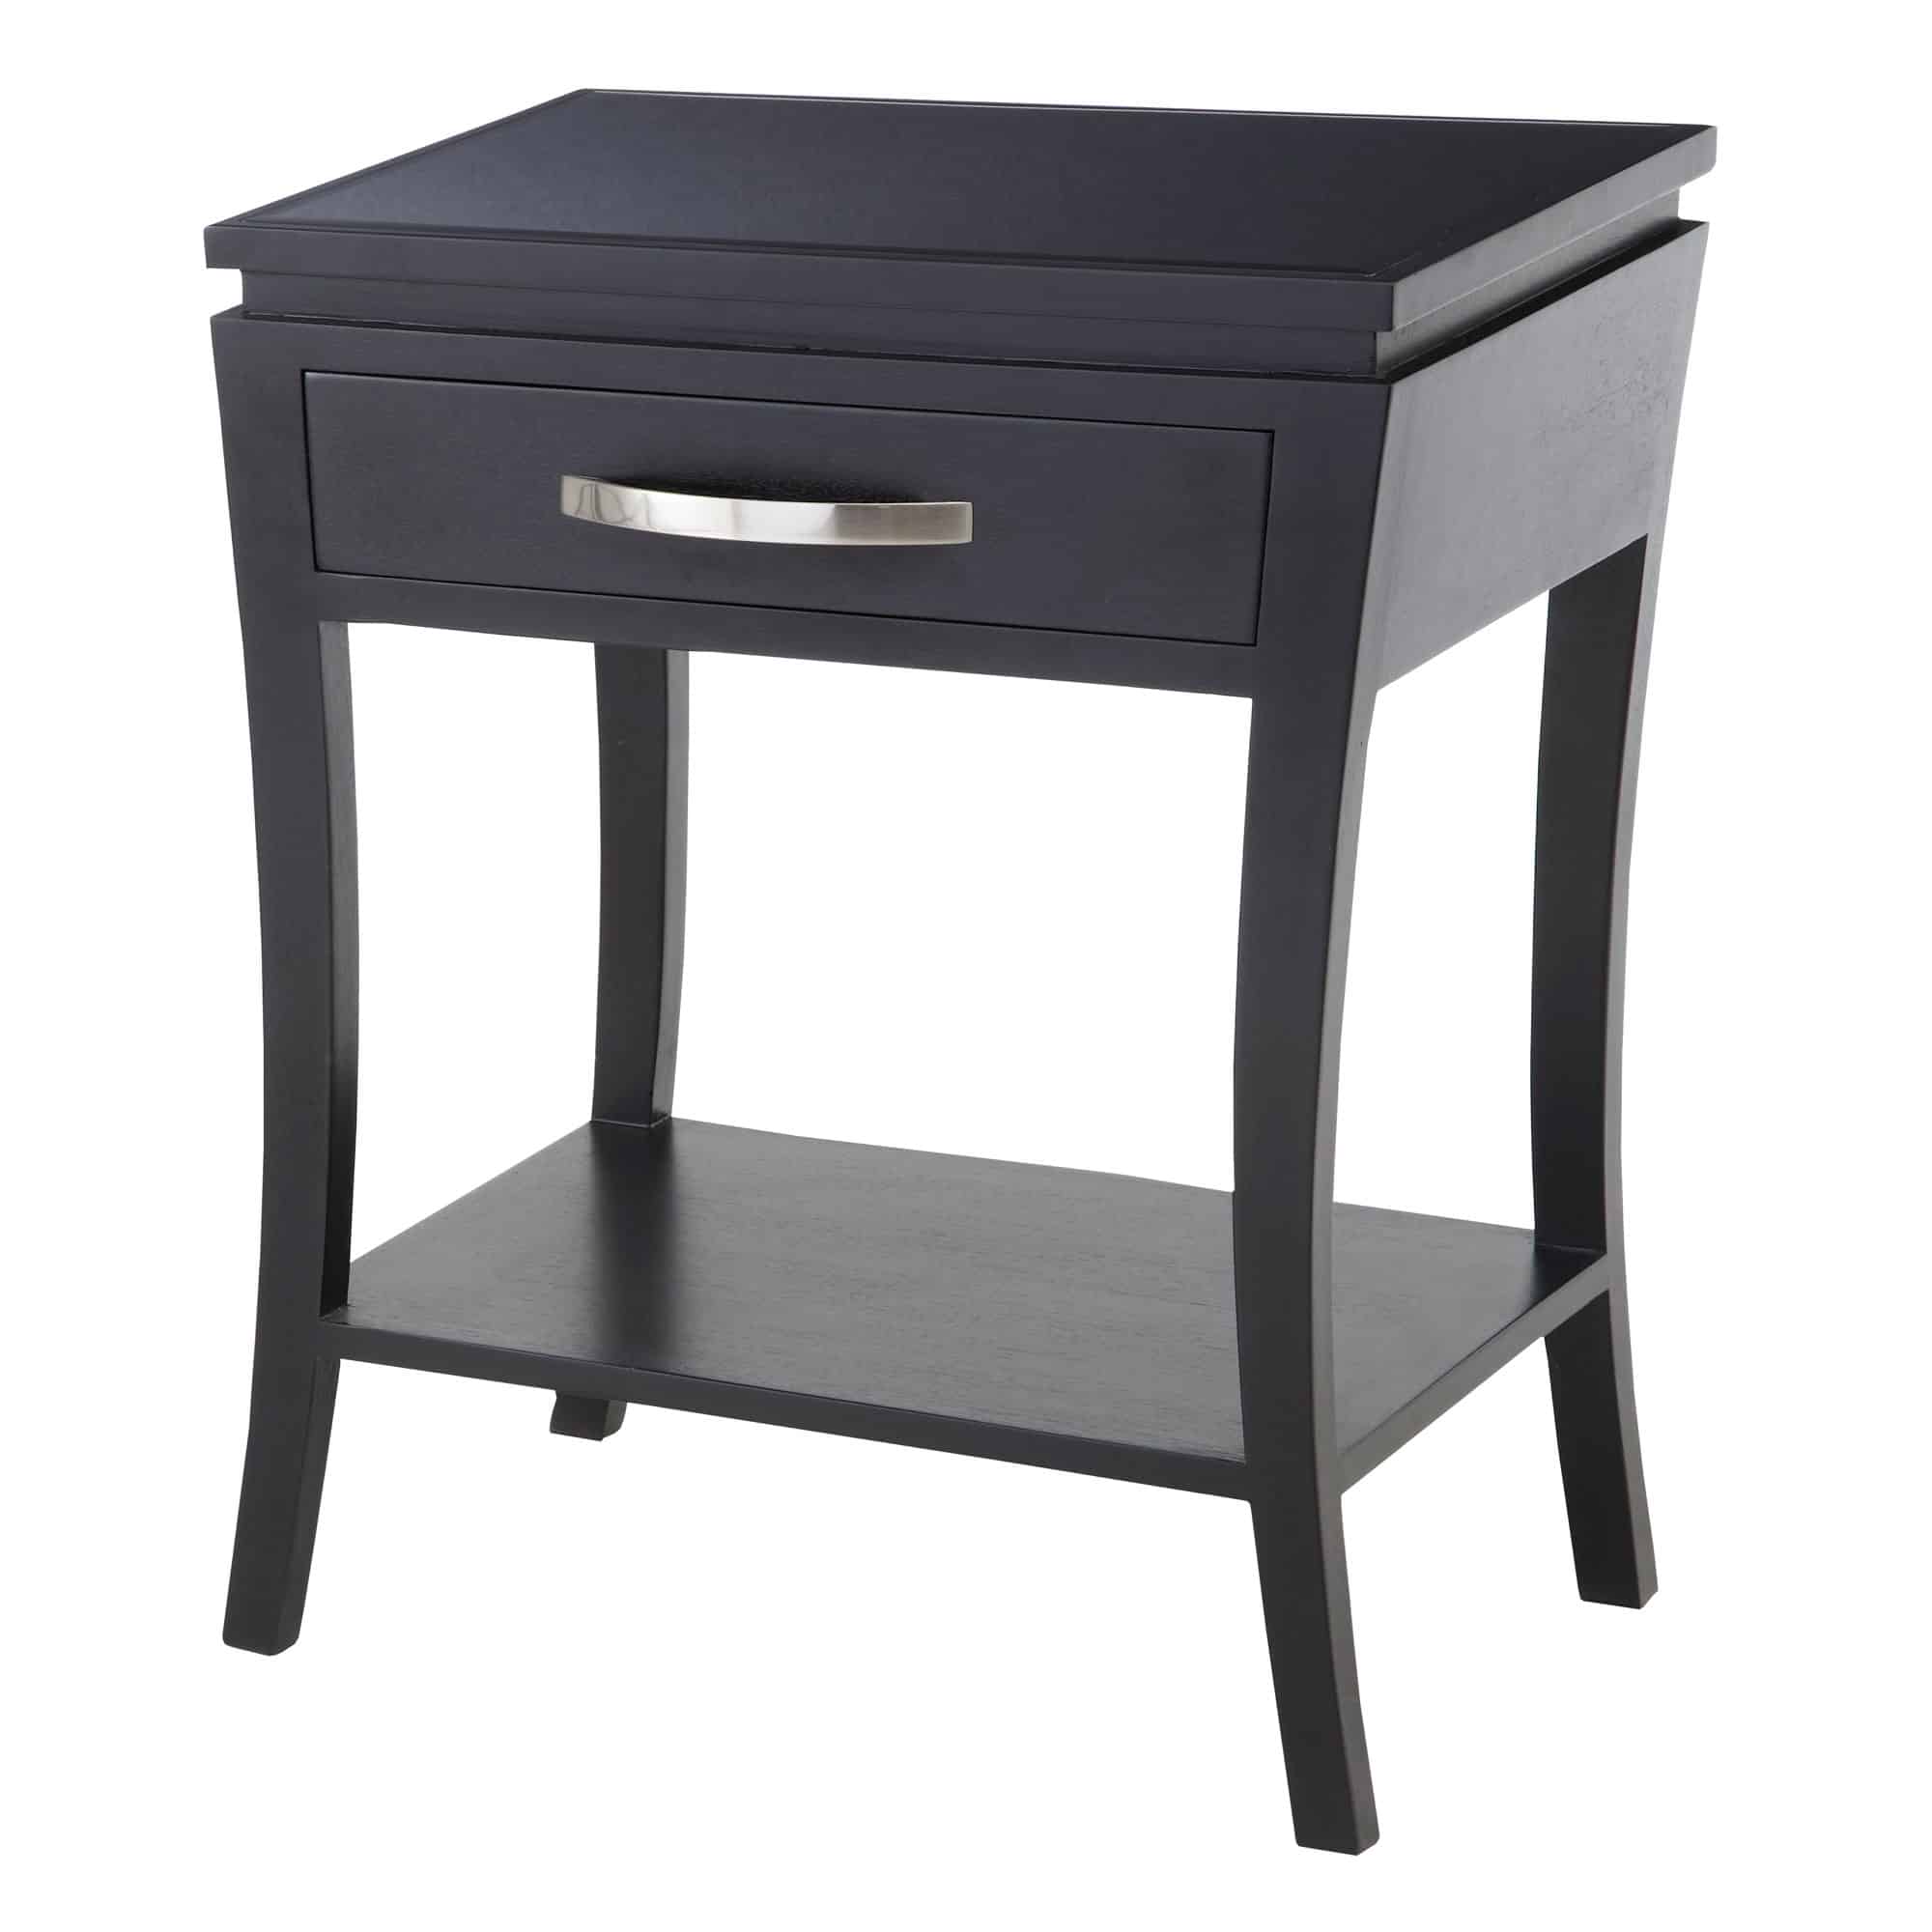 the modena single drawer side table